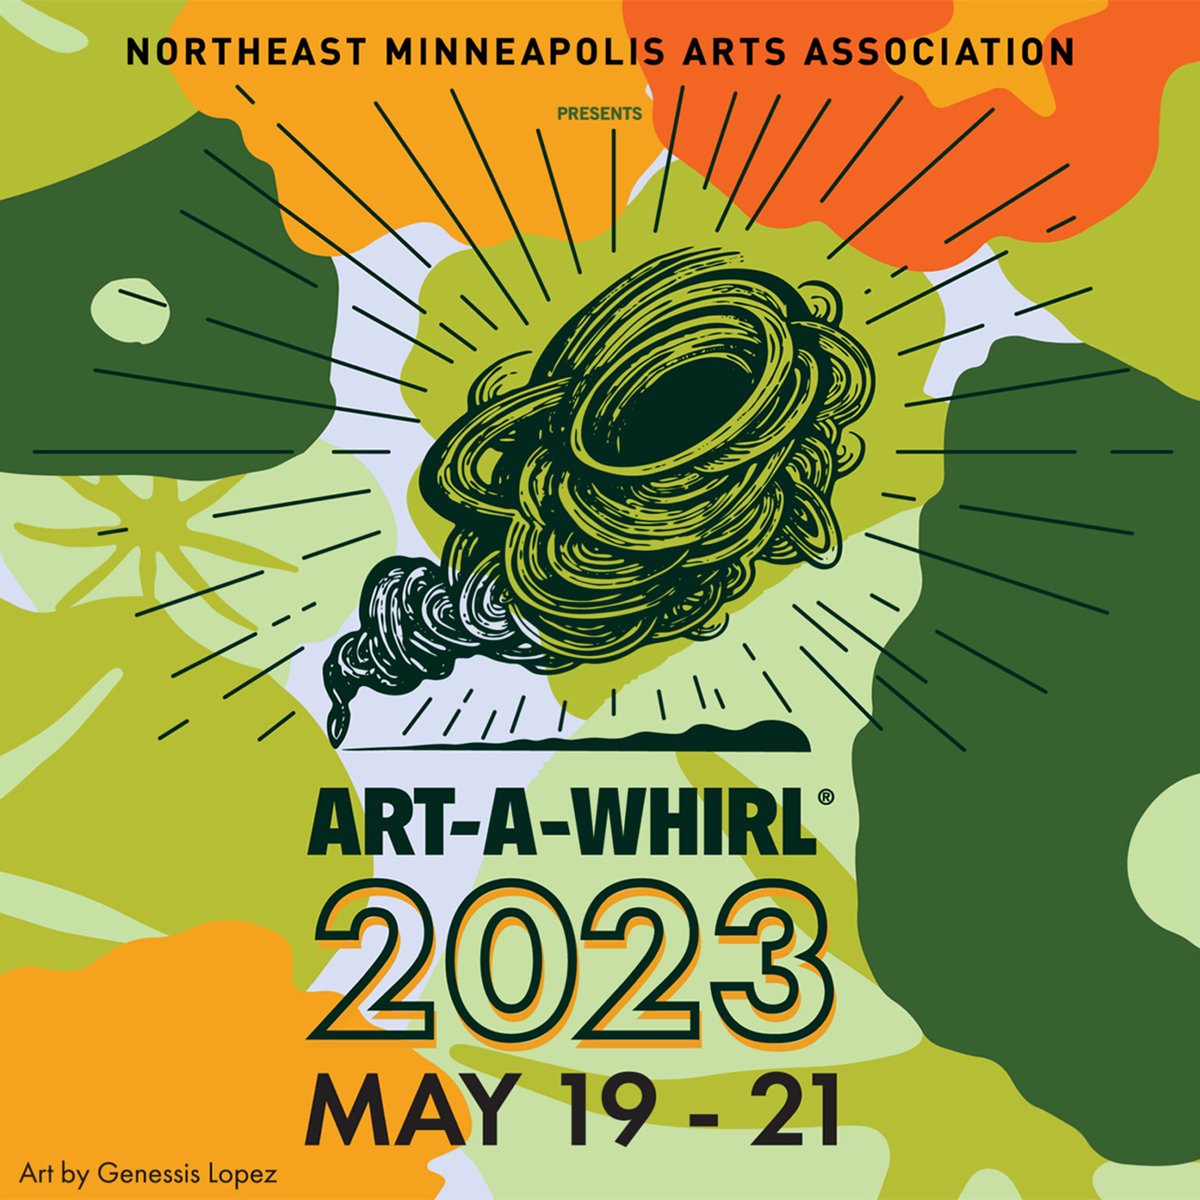 You're Invited! ART-A-WHIRL® 2023 is the third weekend in May in the #NEMplsArtsDistrict of #Minneapolis – FRI/SAT/SUN, May 19–21, 2023 / Art-A-Whirl® is the nation's largest open studio tour. It is FREE and open to the public! #mplsart #CaliforniaBuilding #nemaamn #ArtAWhirl2023